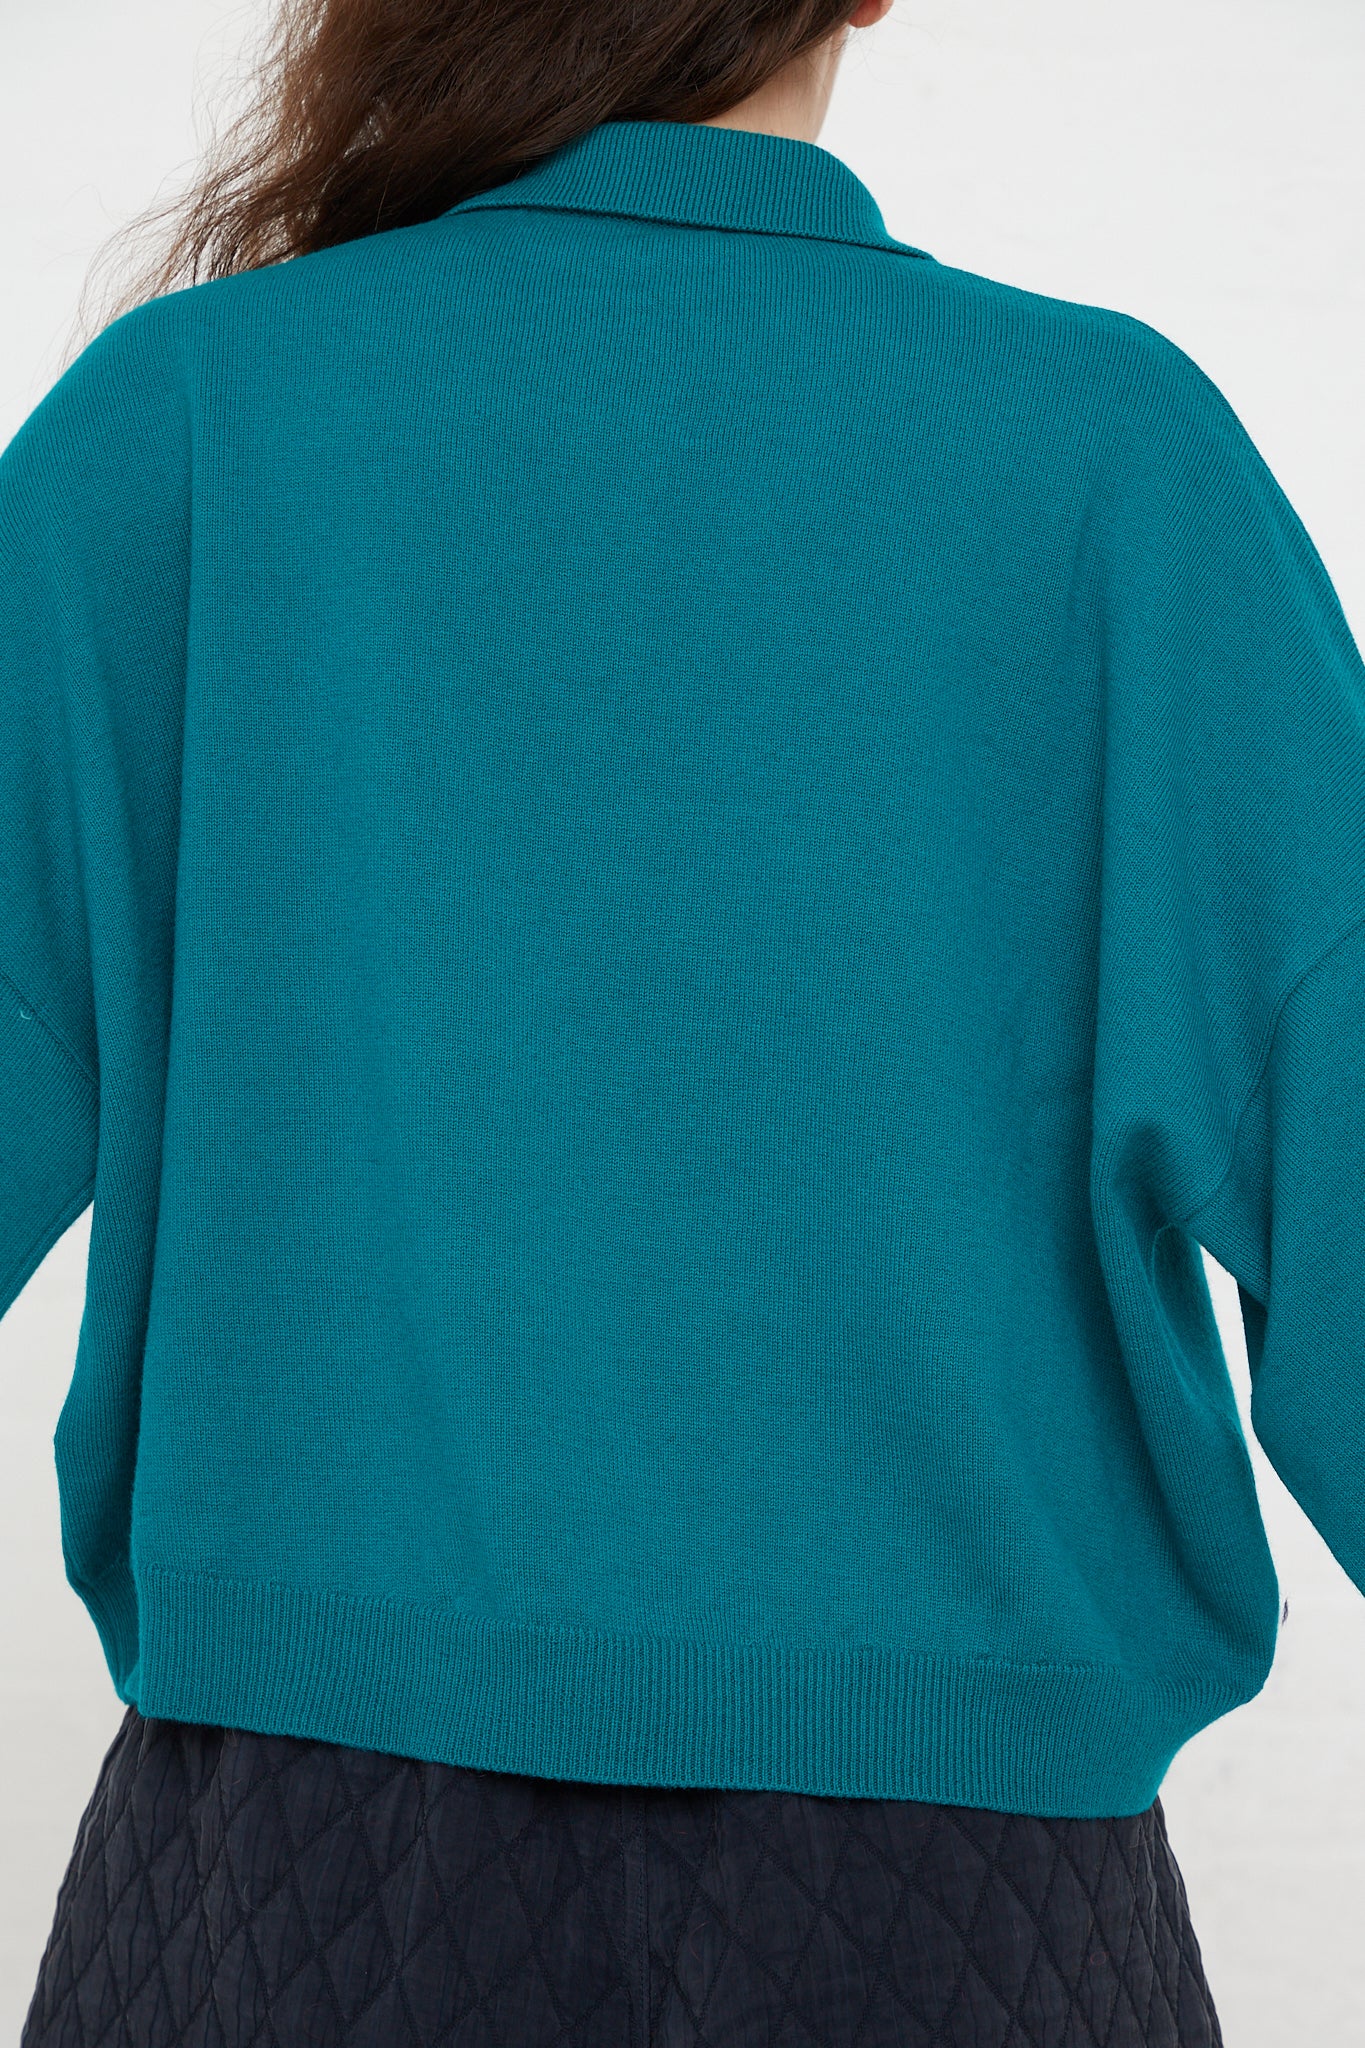 The back view of a woman wearing a Cordera Merino Wool Polo Sweater in Teal Green.